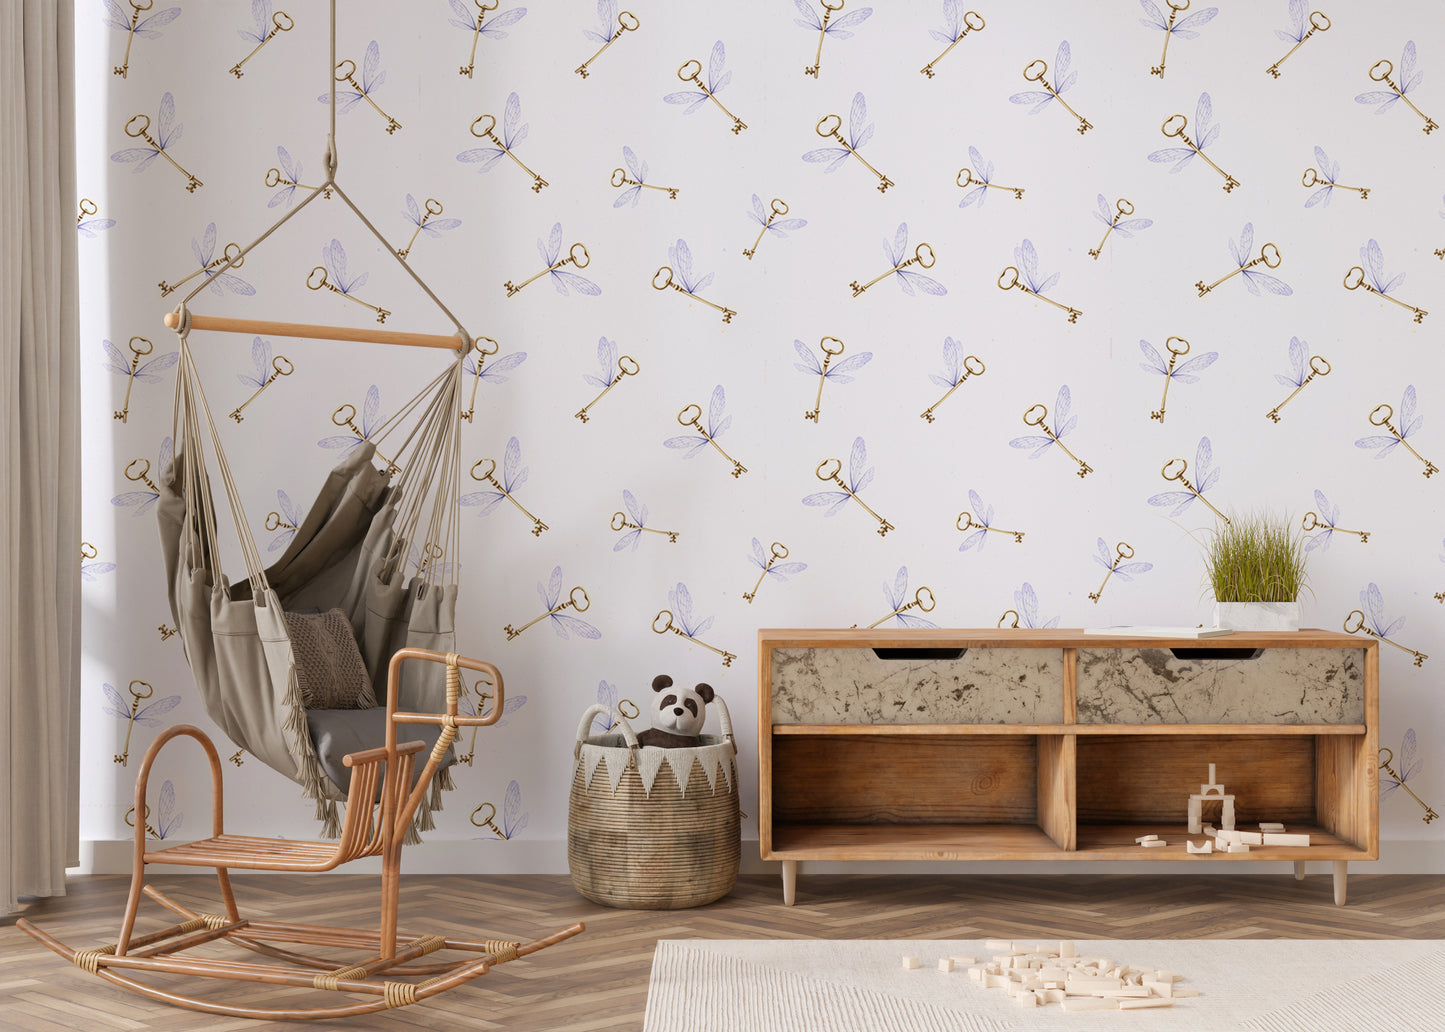 Flying Keys Removable Peel And Stick Wizardly Wallpaper in blue